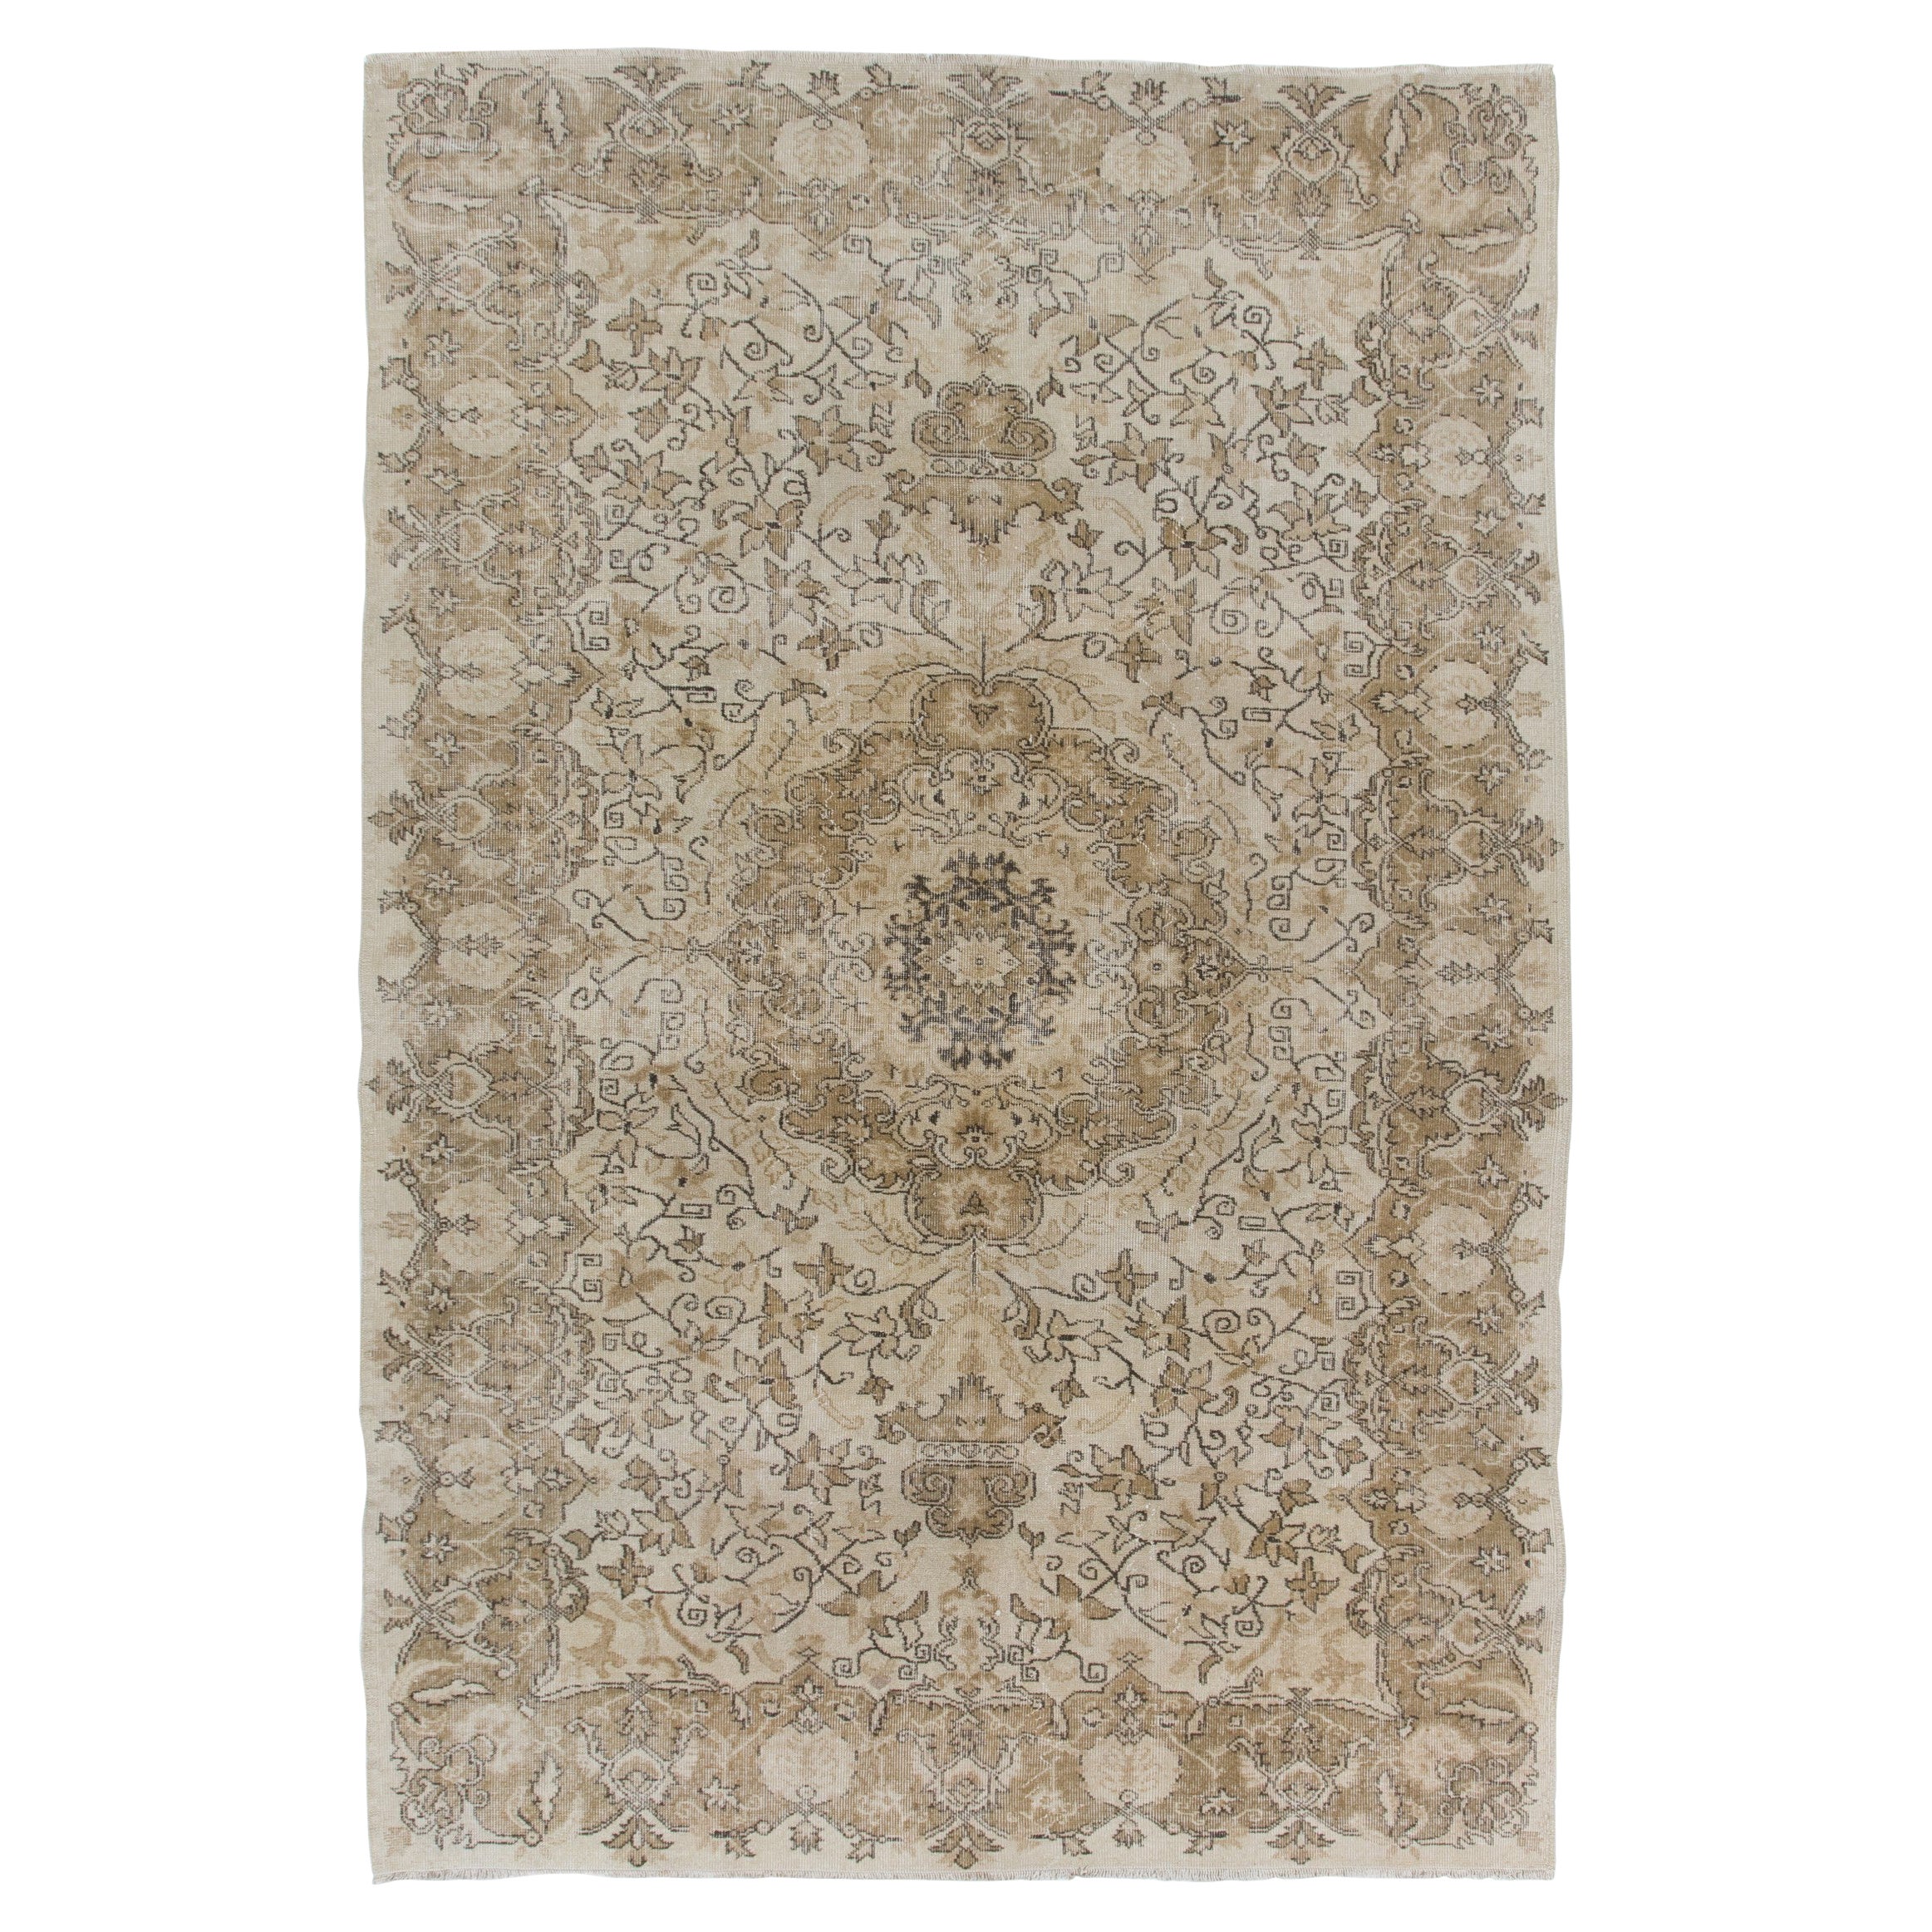 6.7x10 Ft One-of-a-Kind Vintage Handmade Anatolian Oushak Floral Wool Area Rug For Sale